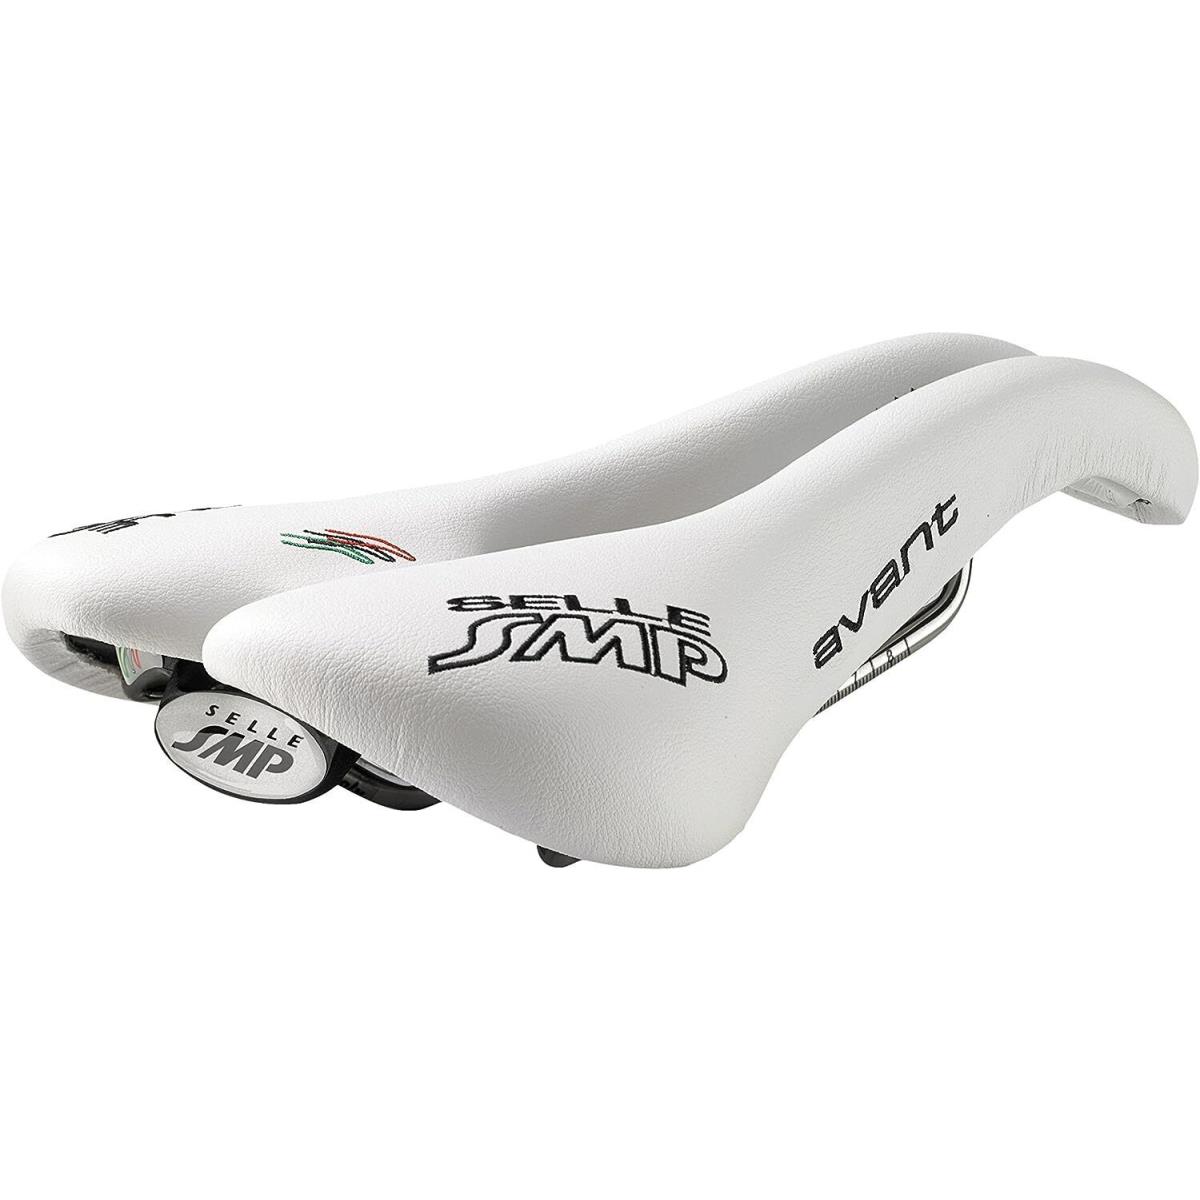 Selle Smp Avant Saddle White 154mm Carbon-reinforced Nylon Leather Cover Usa